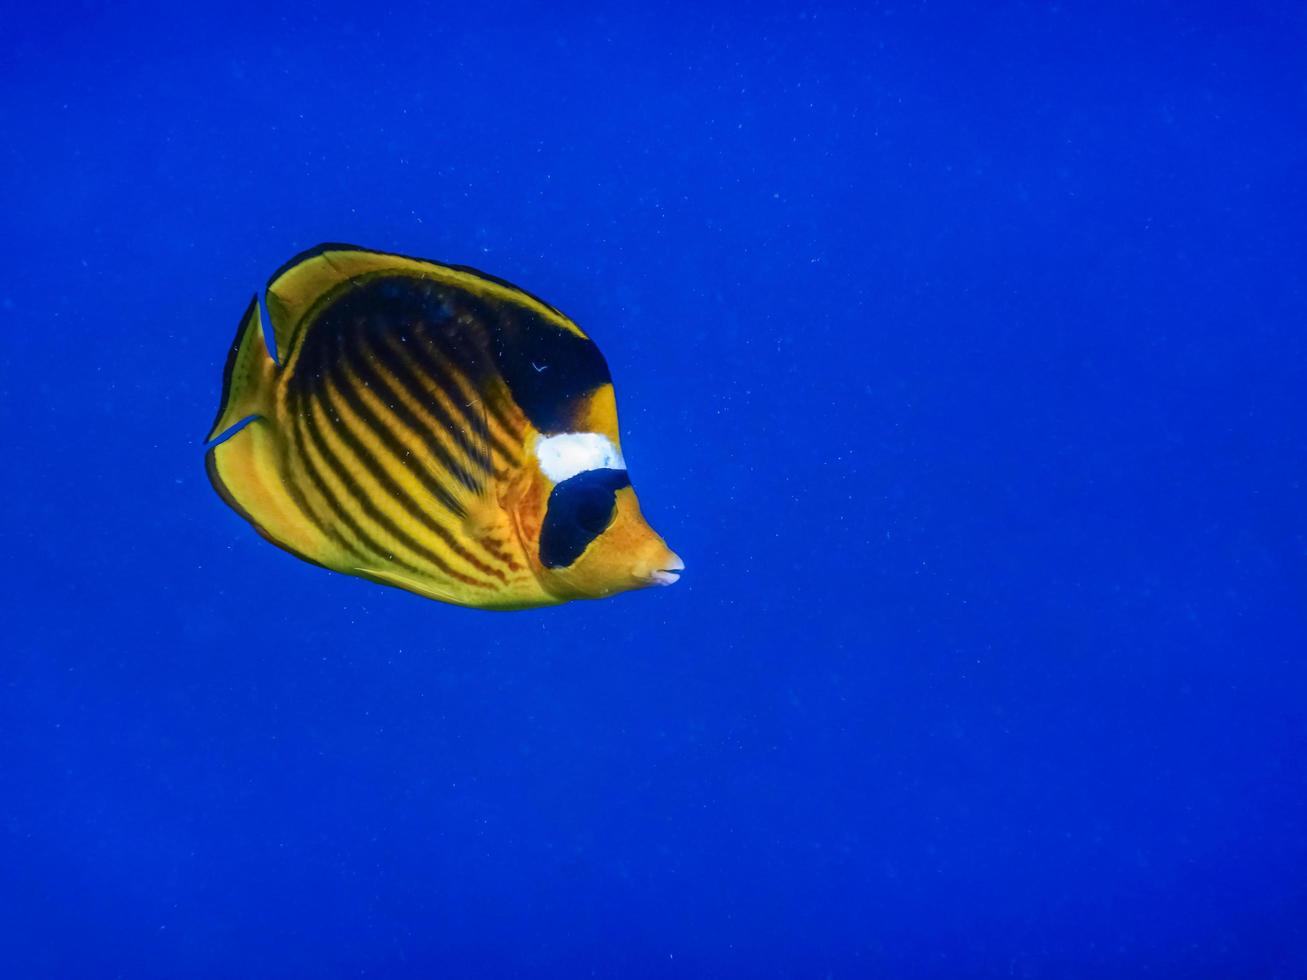 tobacco butterfly fish in deep blue water portrait view photo